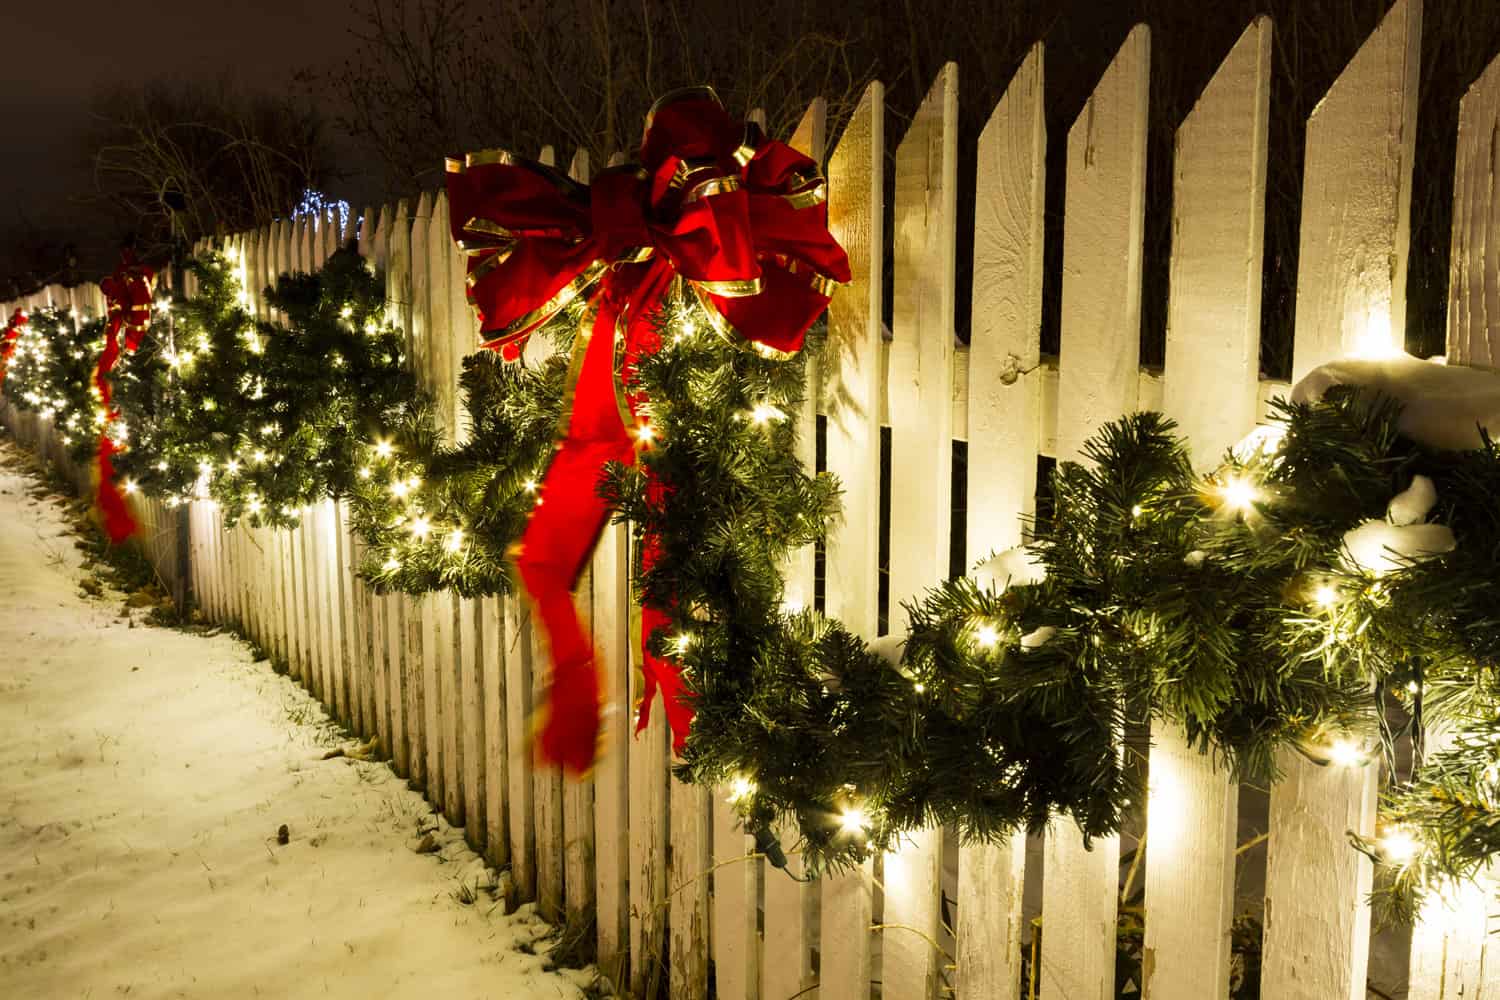 A beautiful fence decorated with Garlands and Christmas lights